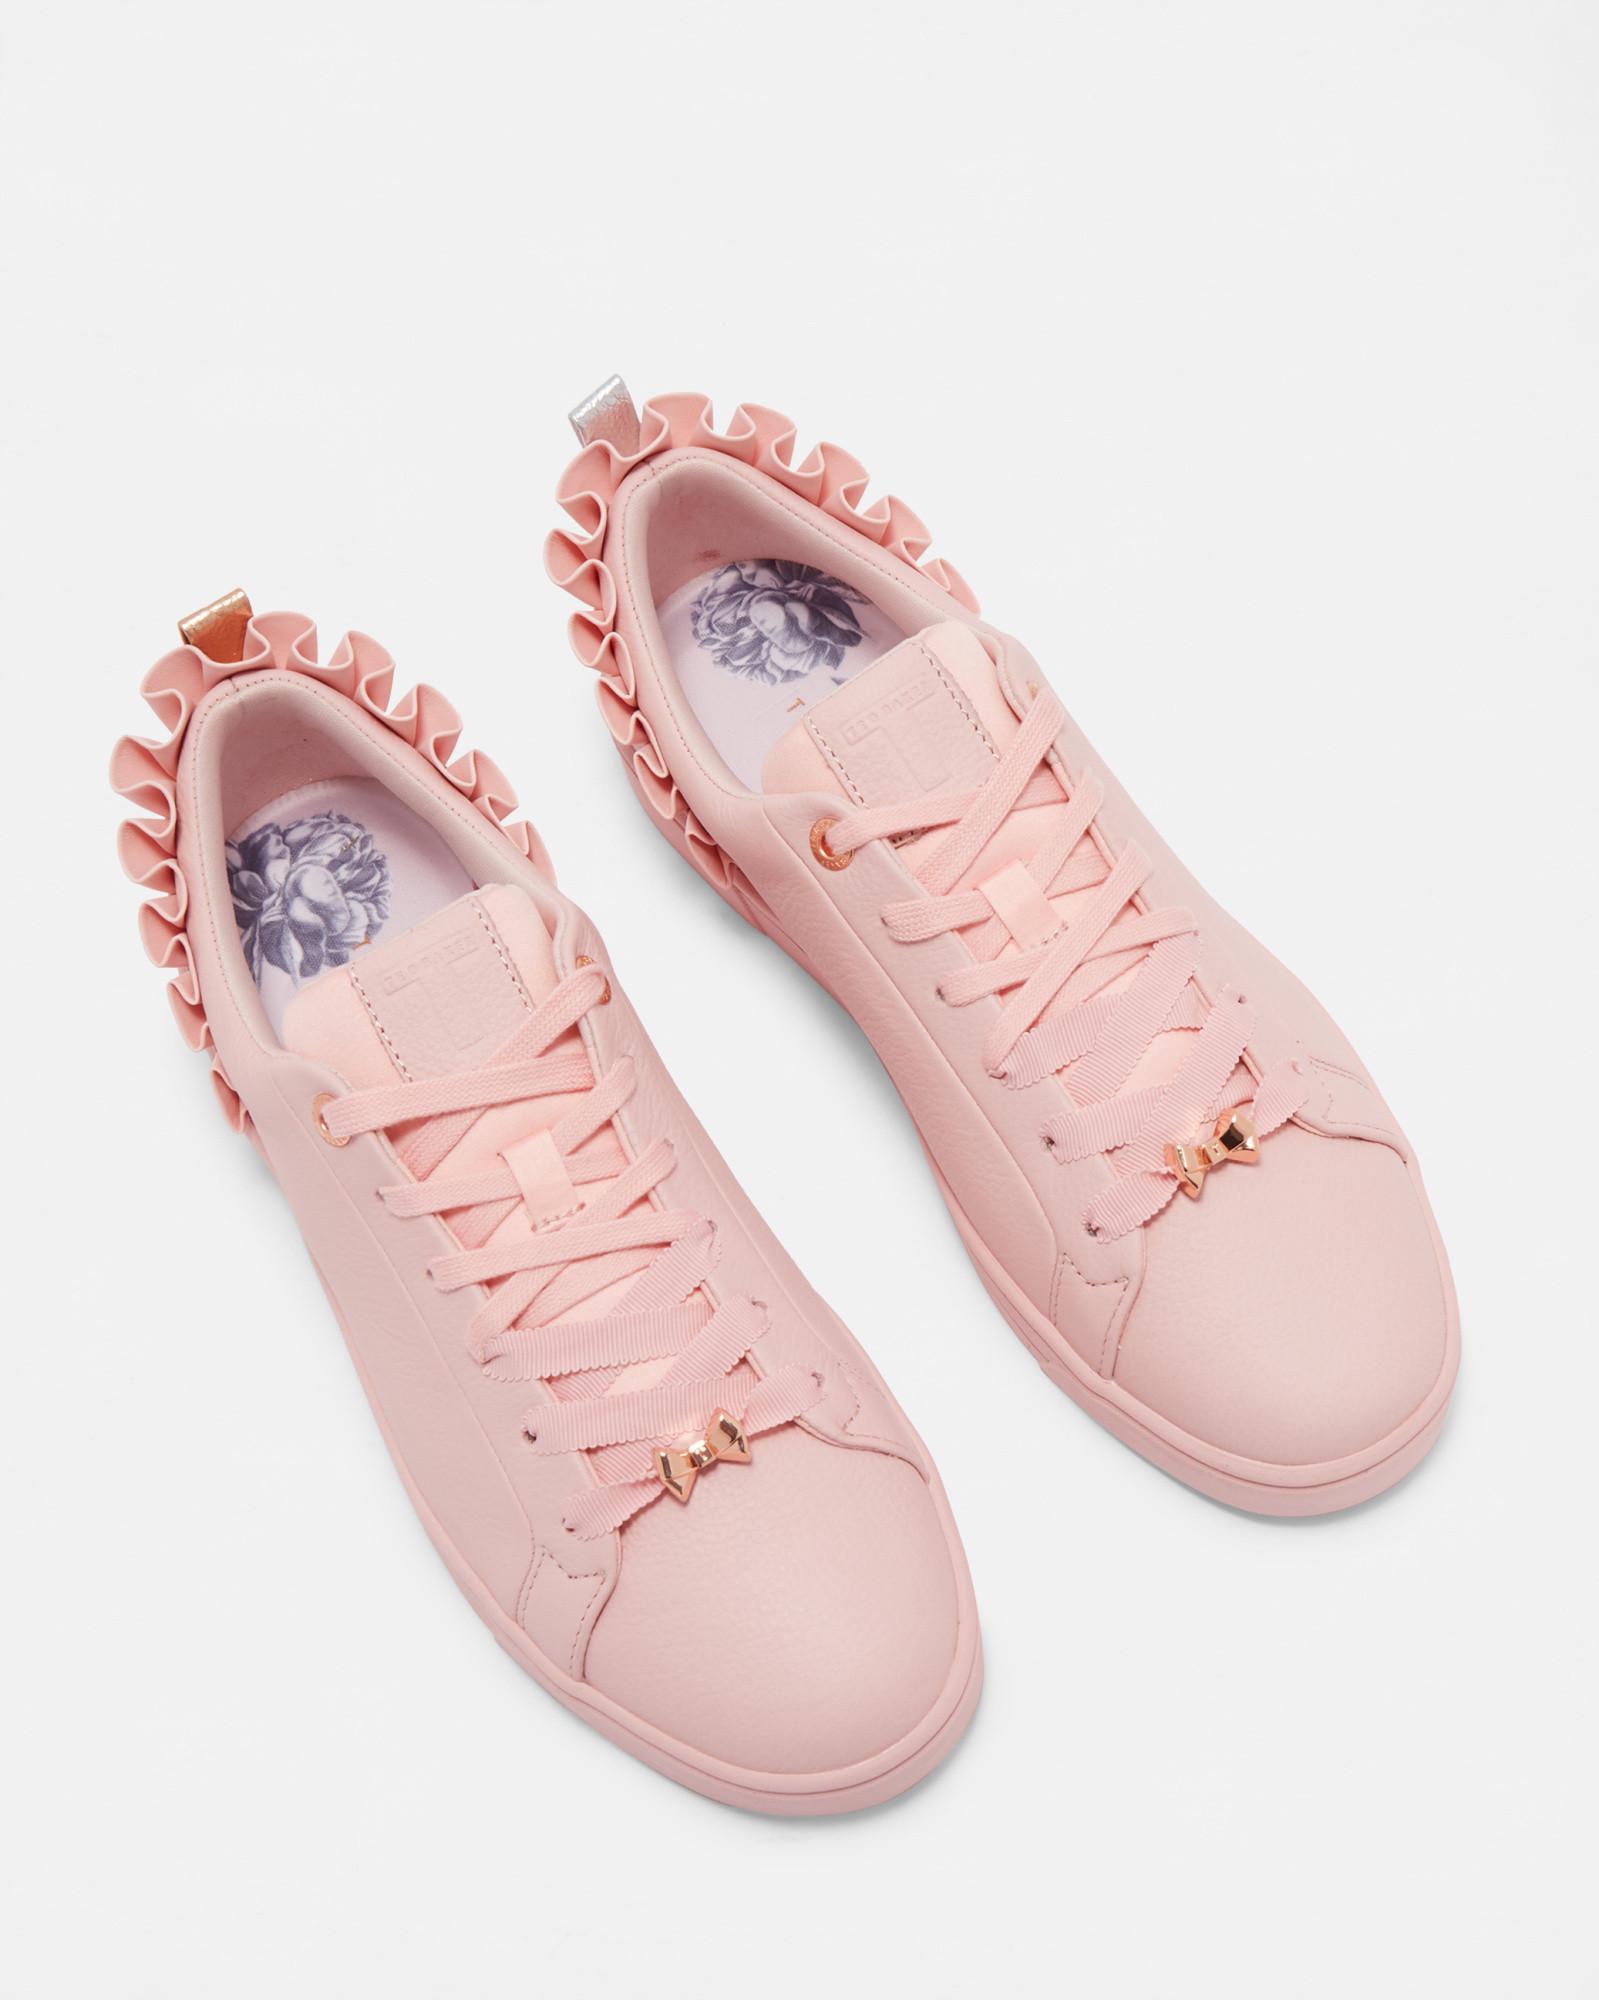 Ted Baker Leather Ruffle Detail Trainers in Dusky Pink (Pink) - Lyst